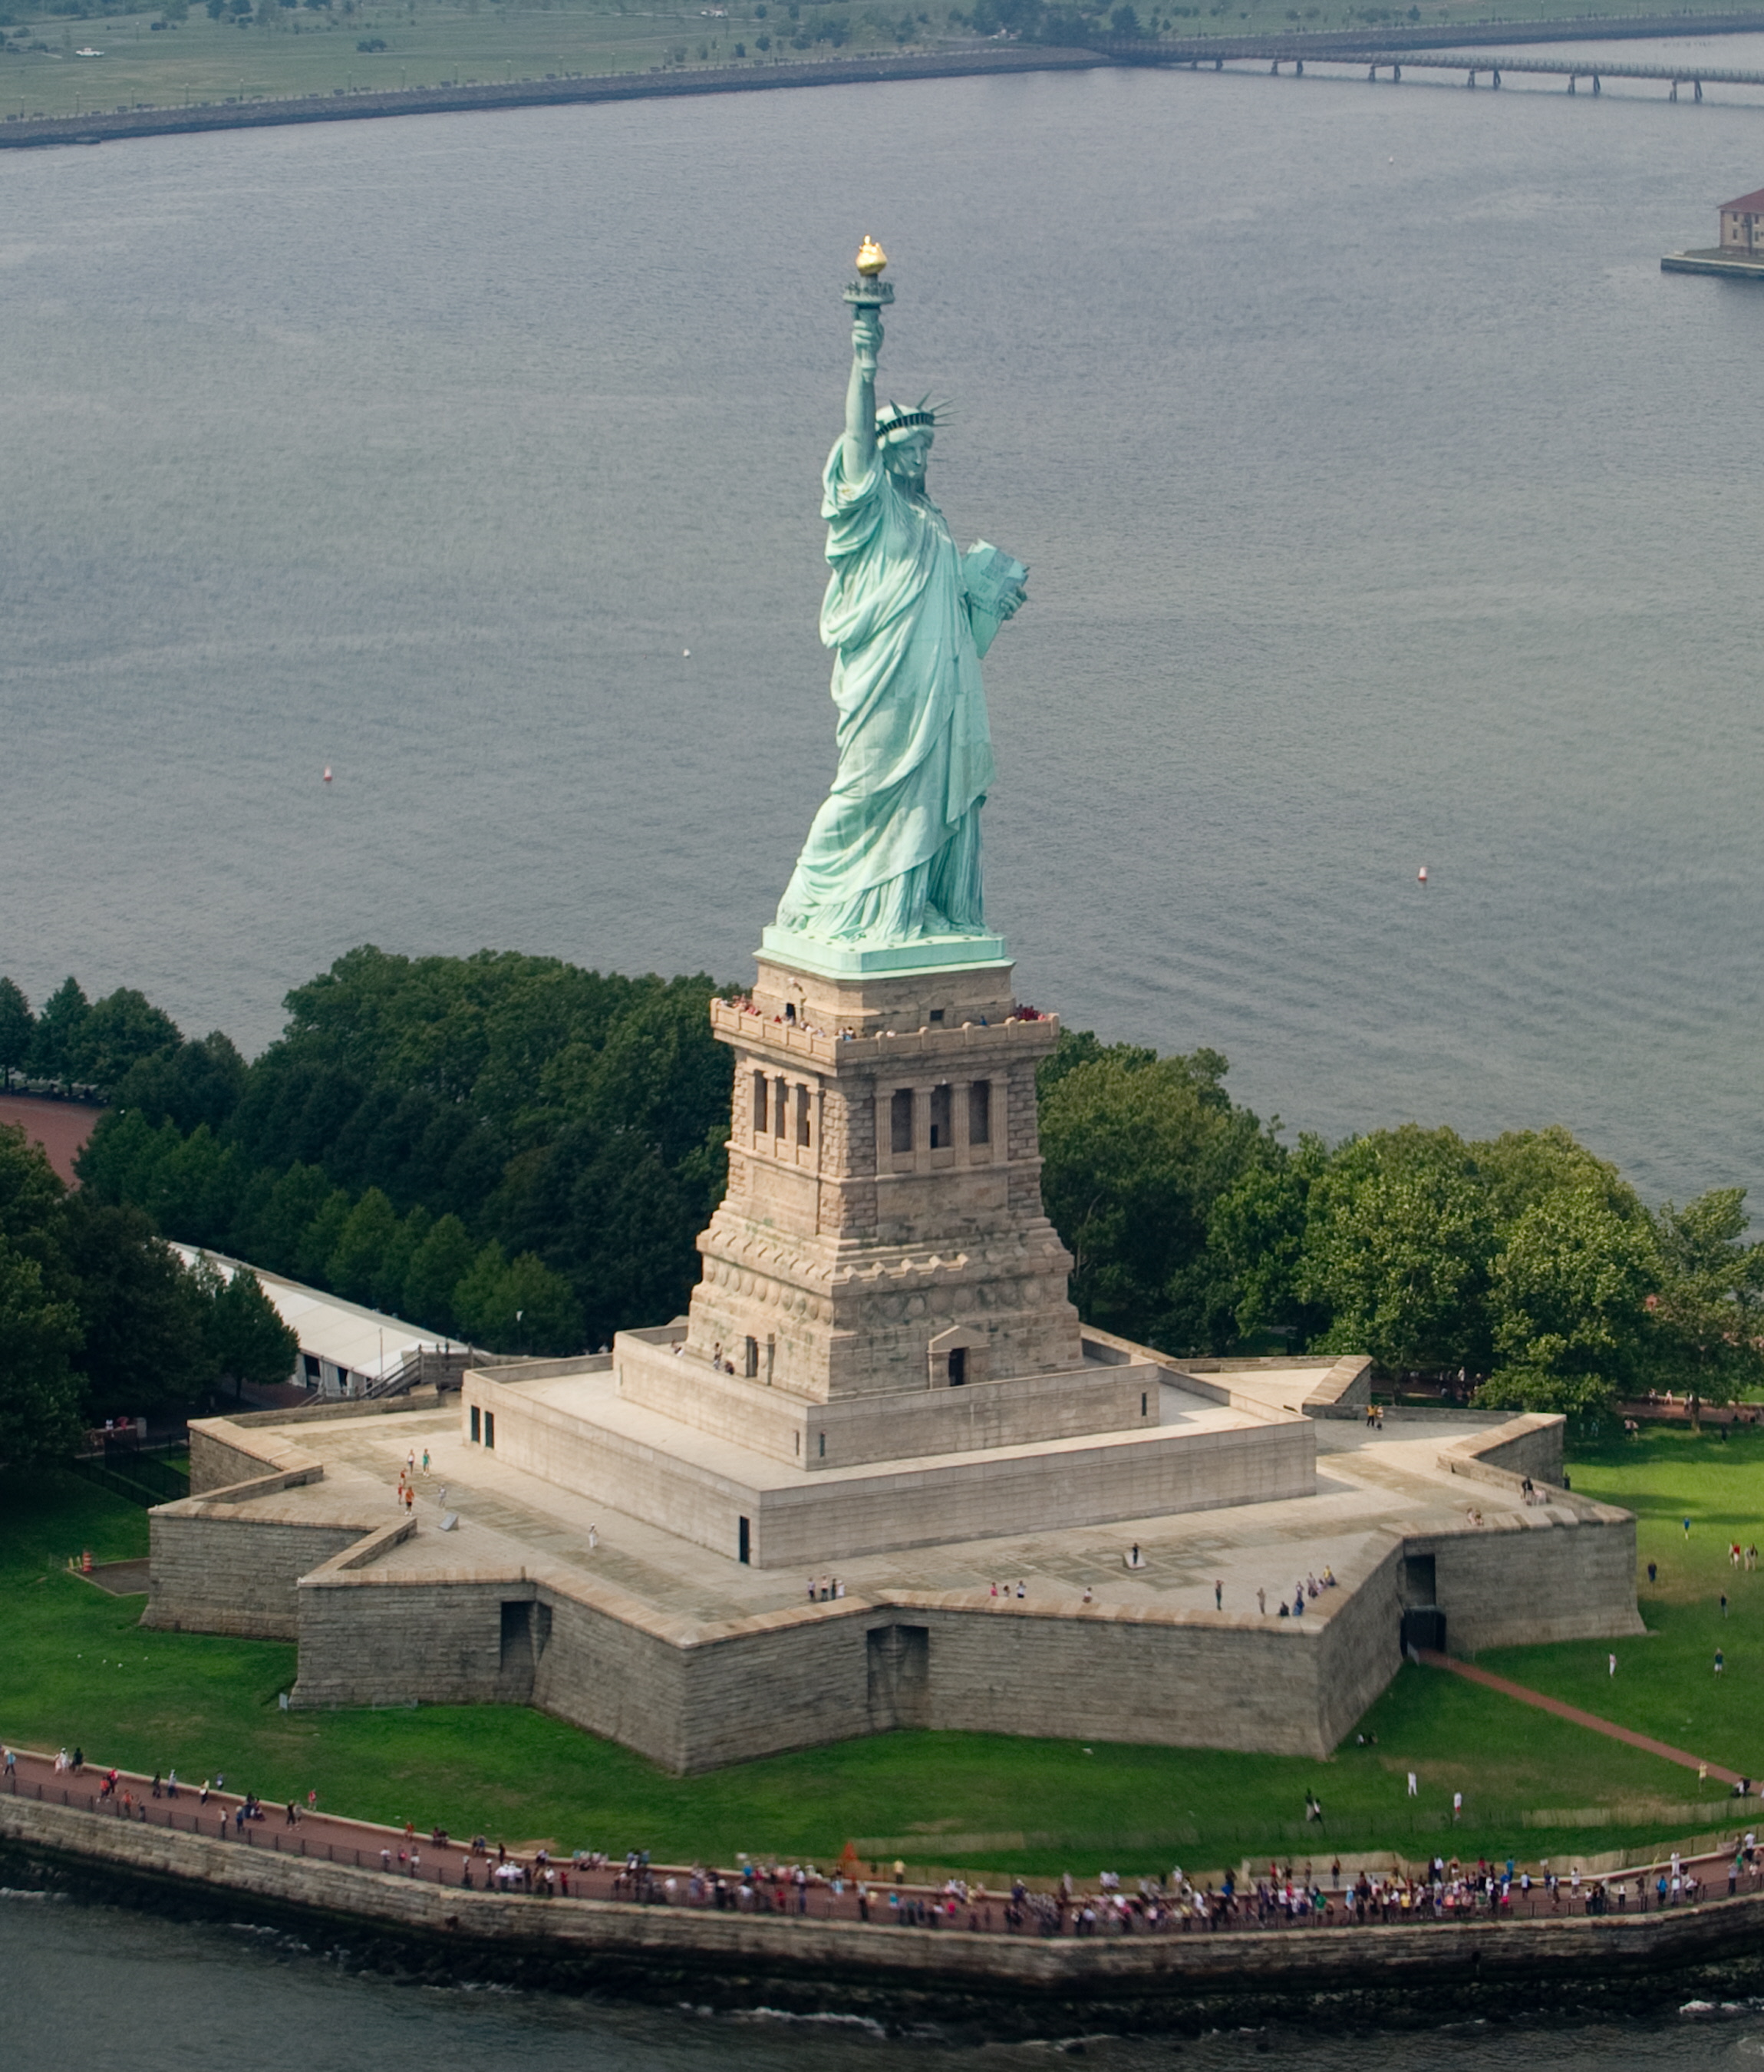 Statue Of Liberty To Close For Yearlong Renovations To Make